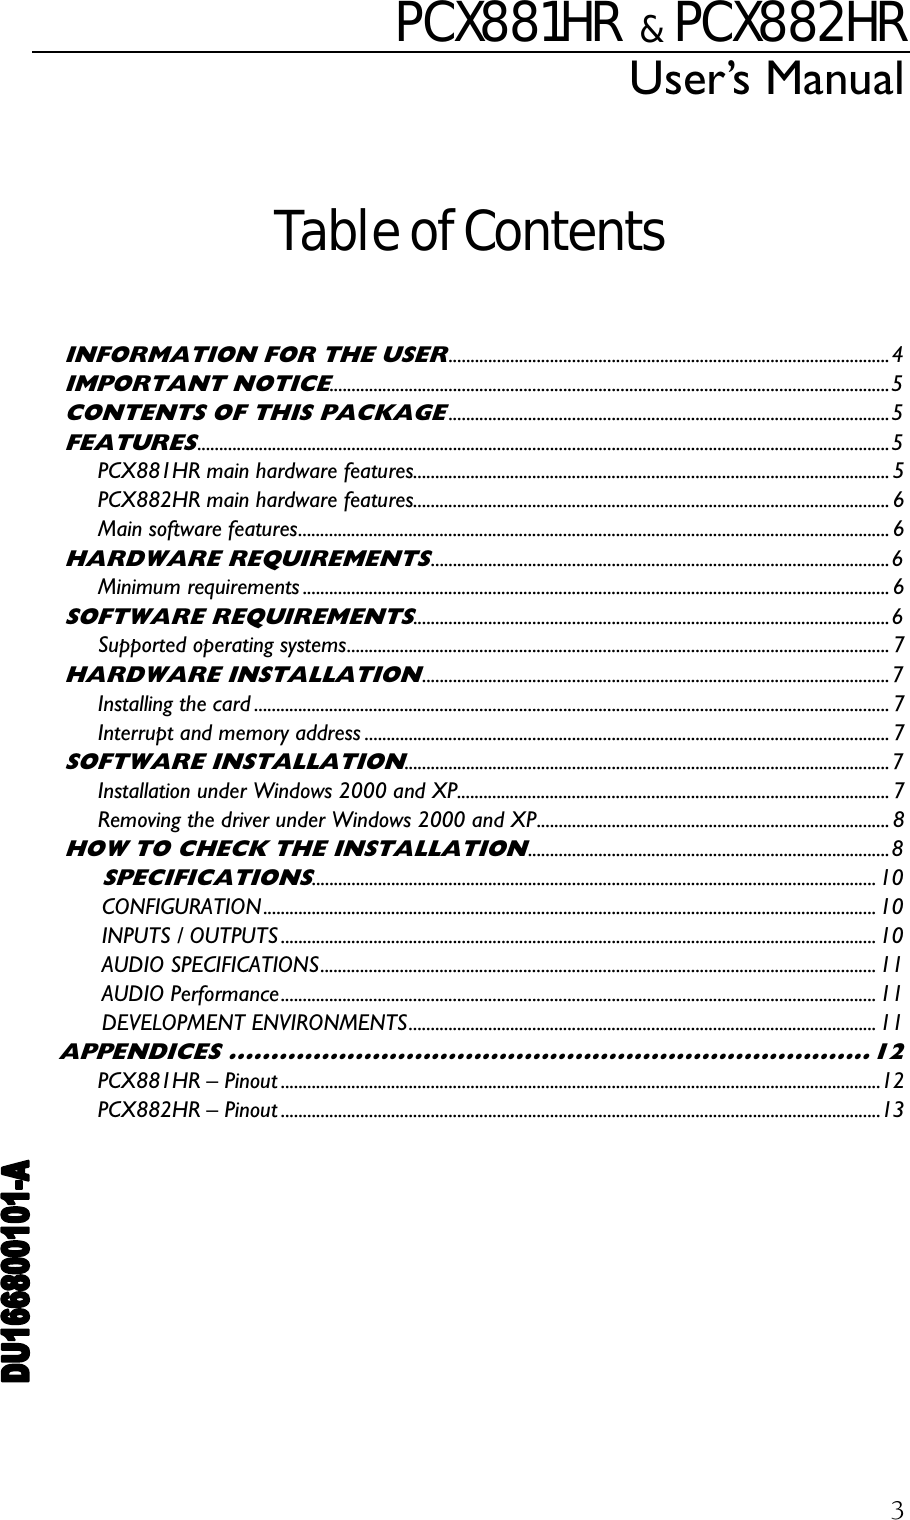 PCX881HR   &amp;  PCX882HR User’s Manual  3 Table of Contents  INFORMATION FOR THE USER....................................................................................................4 IMPORTANT NOTICE...............................................................................................................................5 CONTENTS OF THIS PACKAGE....................................................................................................5 FEATURES.............................................................................................................................................................5 PCX881HR main hardware features............................................................................................................ 5 PCX882HR main hardware features............................................................................................................ 6 Main software features...................................................................................................................................... 6 HARDWARE REQUIREMENTS........................................................................................................6 Minimum requirements ..................................................................................................................................... 6 SOFTWARE REQUIREMENTS............................................................................................................6 Supported operating systems........................................................................................................................... 7 HARDWARE INSTALLATION..........................................................................................................7 Installing the card ................................................................................................................................................ 7 Interrupt and memory address ....................................................................................................................... 7 SOFTWARE INSTALLATION..............................................................................................................7 Installation under Windows 2000 and XP.................................................................................................. 7 Removing the driver under Windows 2000 and XP................................................................................ 8 HOW TO CHECK THE INSTALLATION..................................................................................8 SPECIFICATIONS................................................................................................................................10 CONFIGURATION ........................................................................................................................................... 10 INPUTS / OUTPUTS ....................................................................................................................................... 10 AUDIO SPECIFICATIONS.............................................................................................................................. 11 AUDIO Performance....................................................................................................................................... 11 DEVELOPMENT ENVIRONMENTS.......................................................................................................... 11 APPENDICES ............................................................................12 PCX881HR – Pinout ........................................................................................................................................12 PCX882HR – Pinout ........................................................................................................................................13  